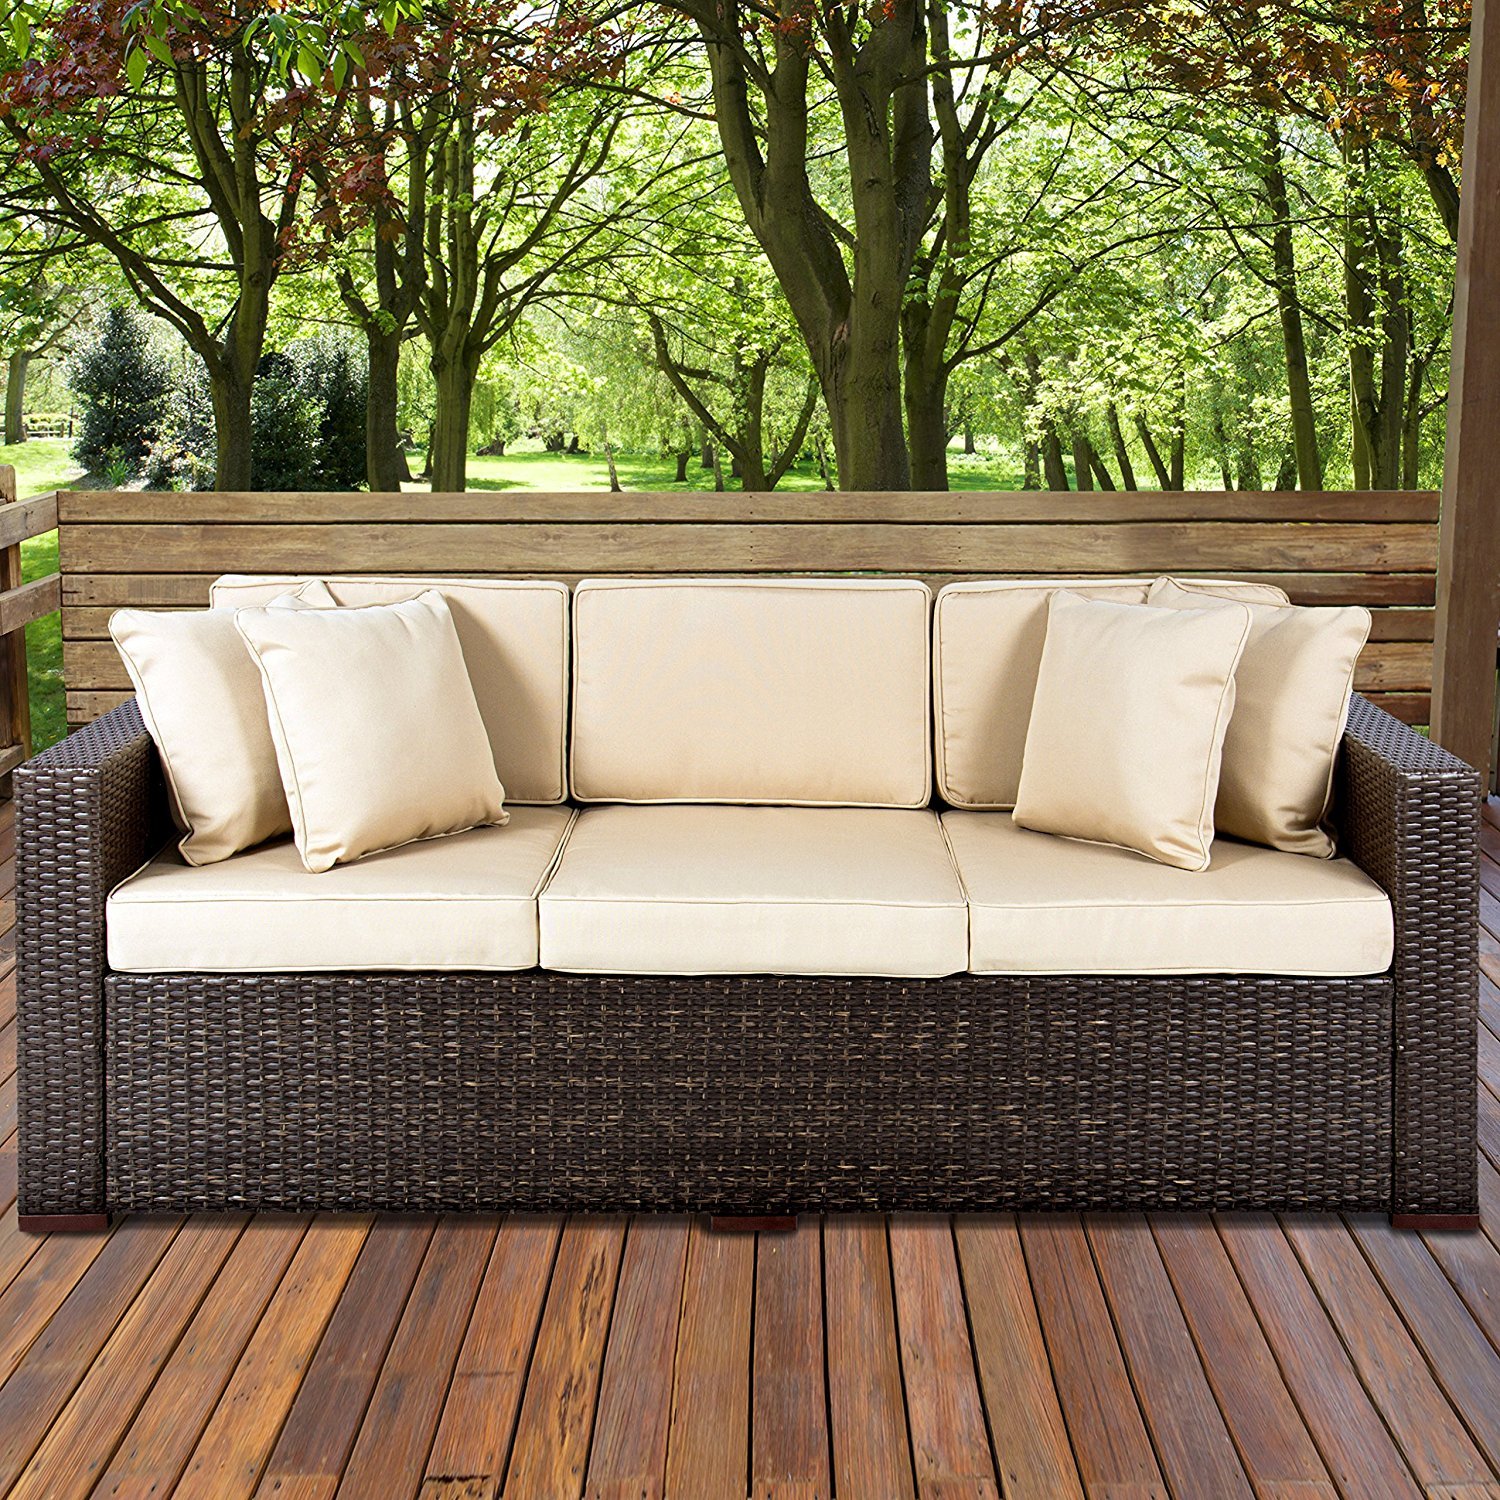 Outdoor Wicker Sofa Couch Patio Furniture